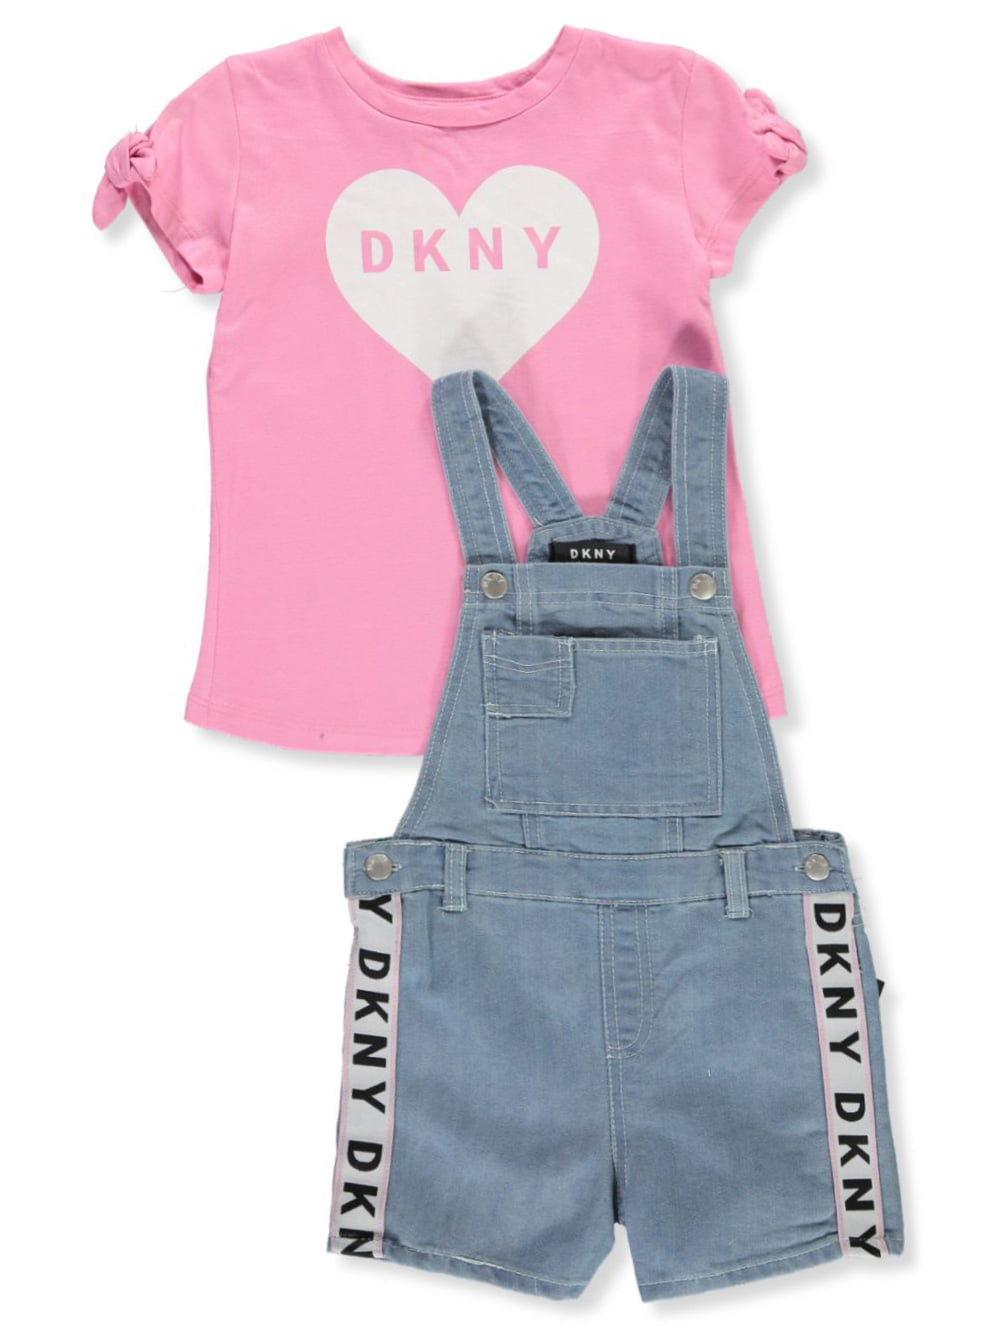 DKNY Girls Baby and Toddler Layette Set